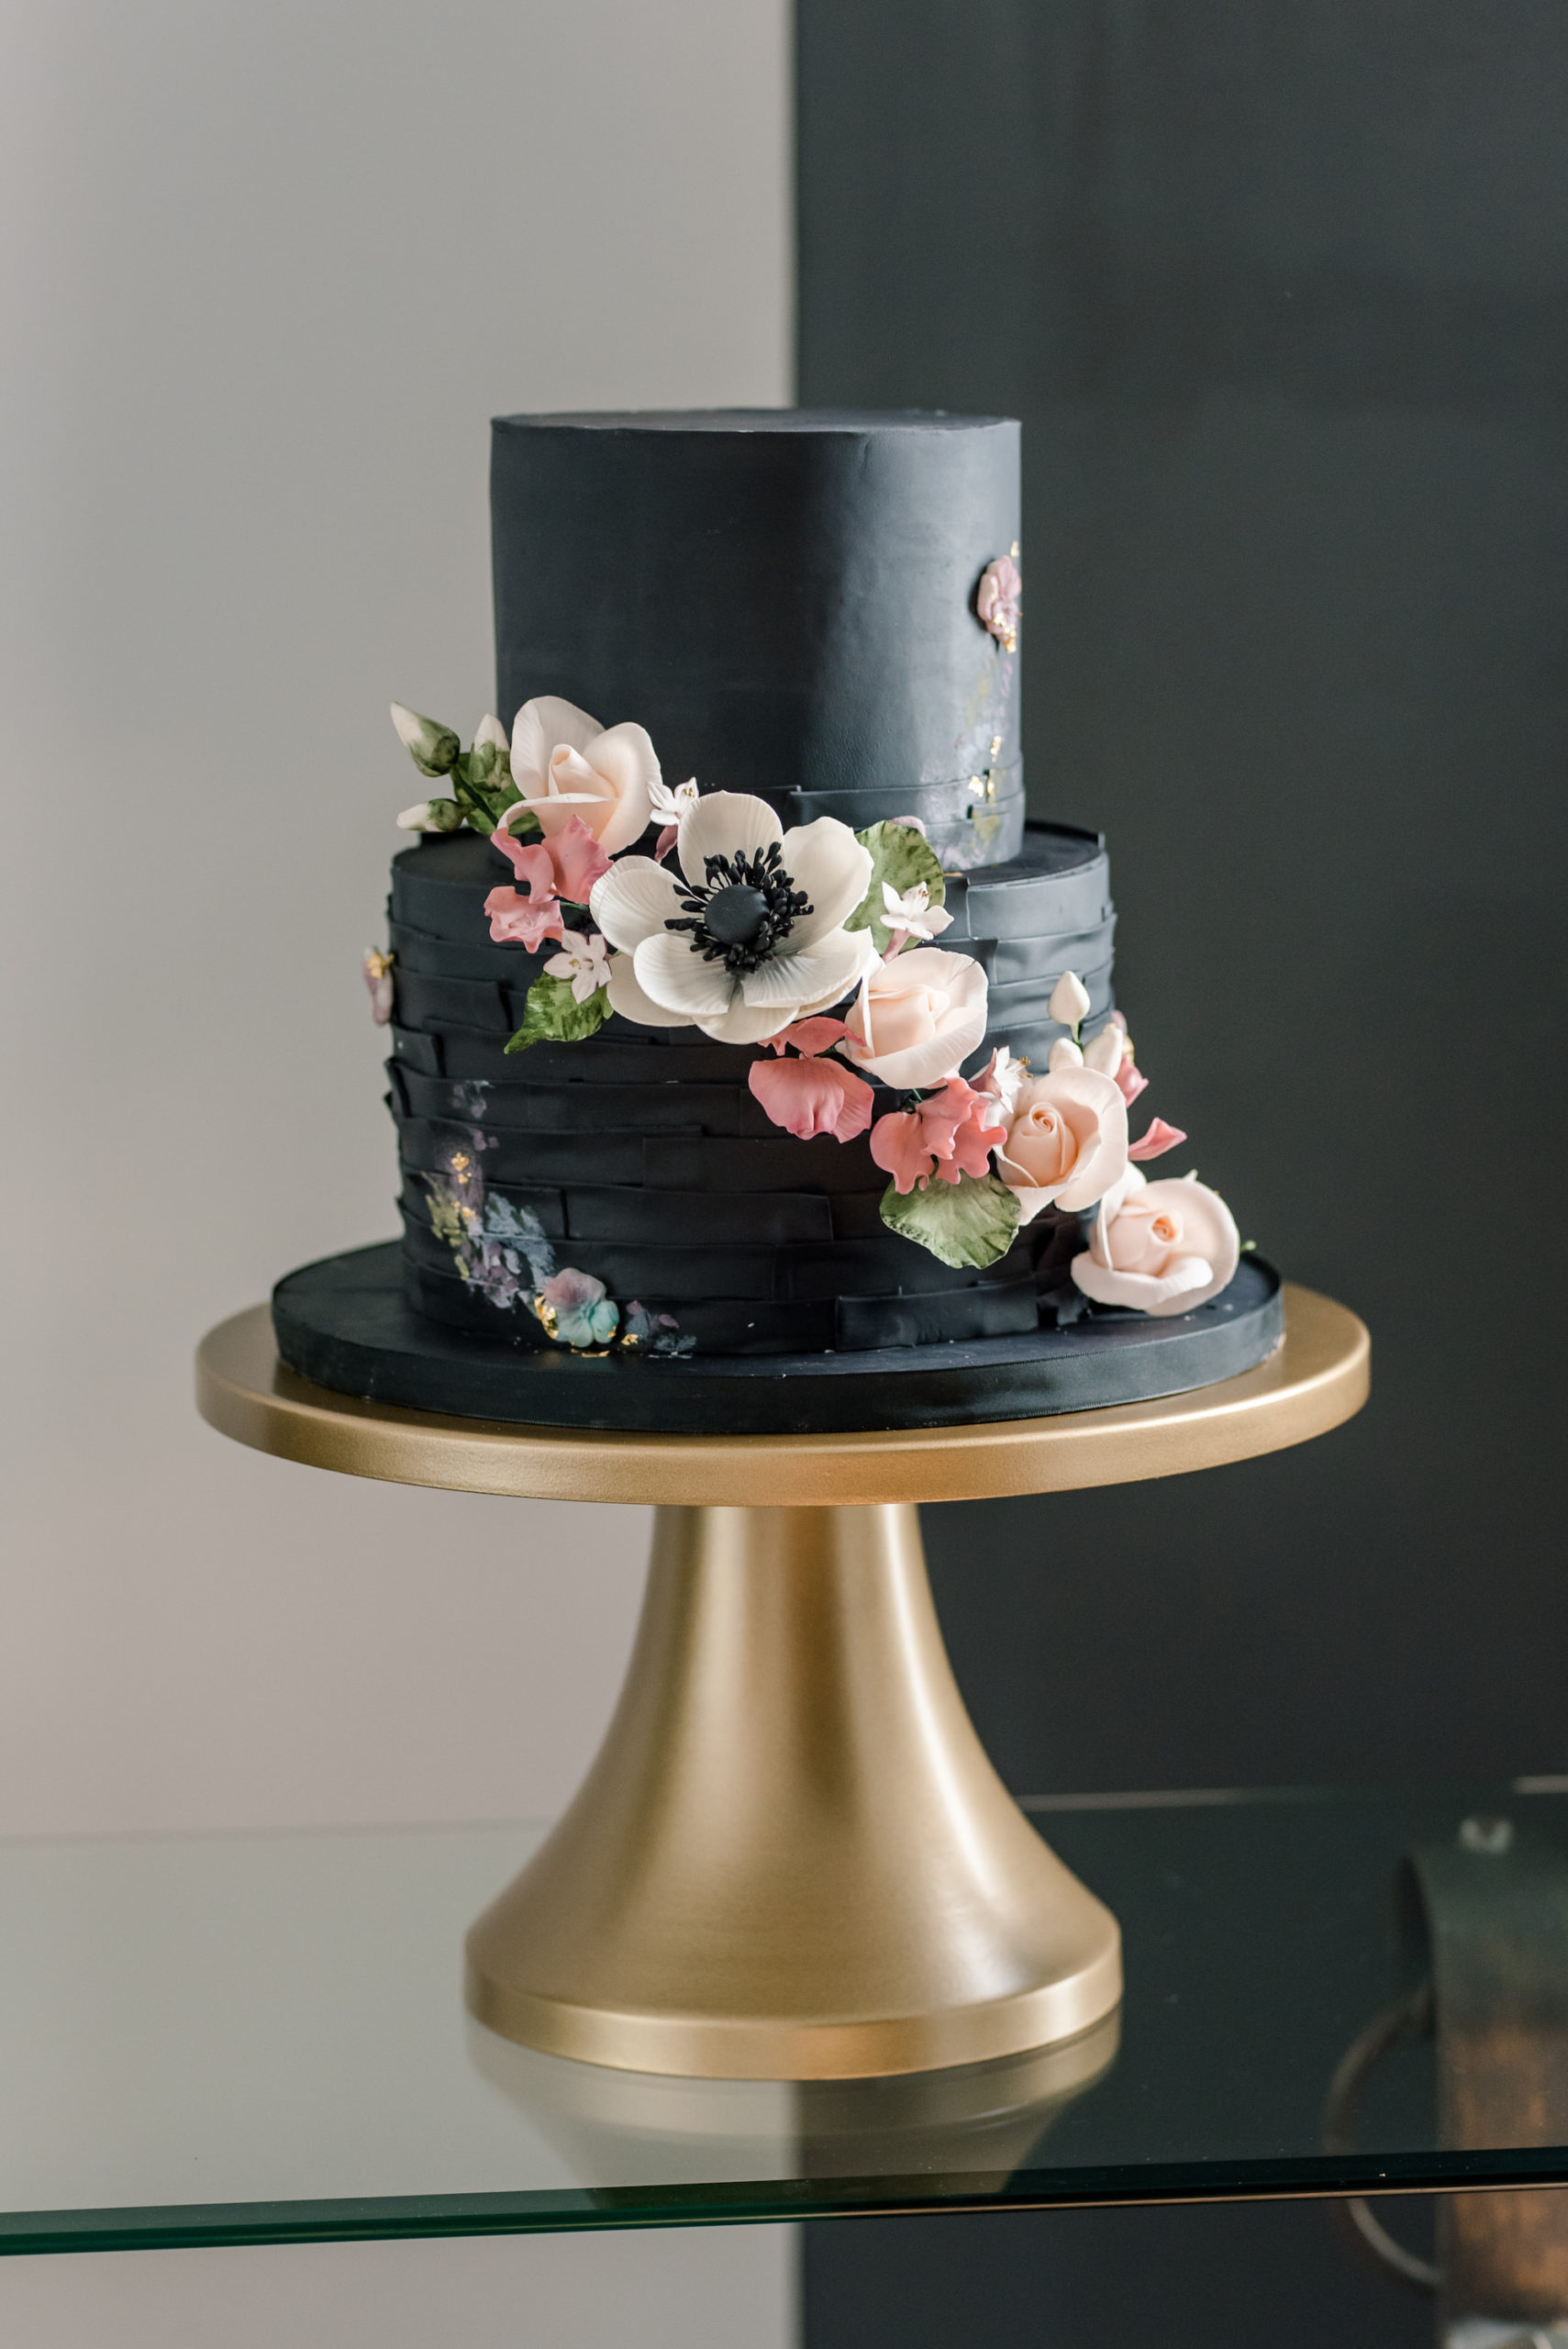 Unique Dark Luxe Black Two Tier Wedding Cake with Cascading White Anemone and Blush Pink Flowers | Tampa Bay Cake Company | Wedding Planner Elegant Affairs by Design